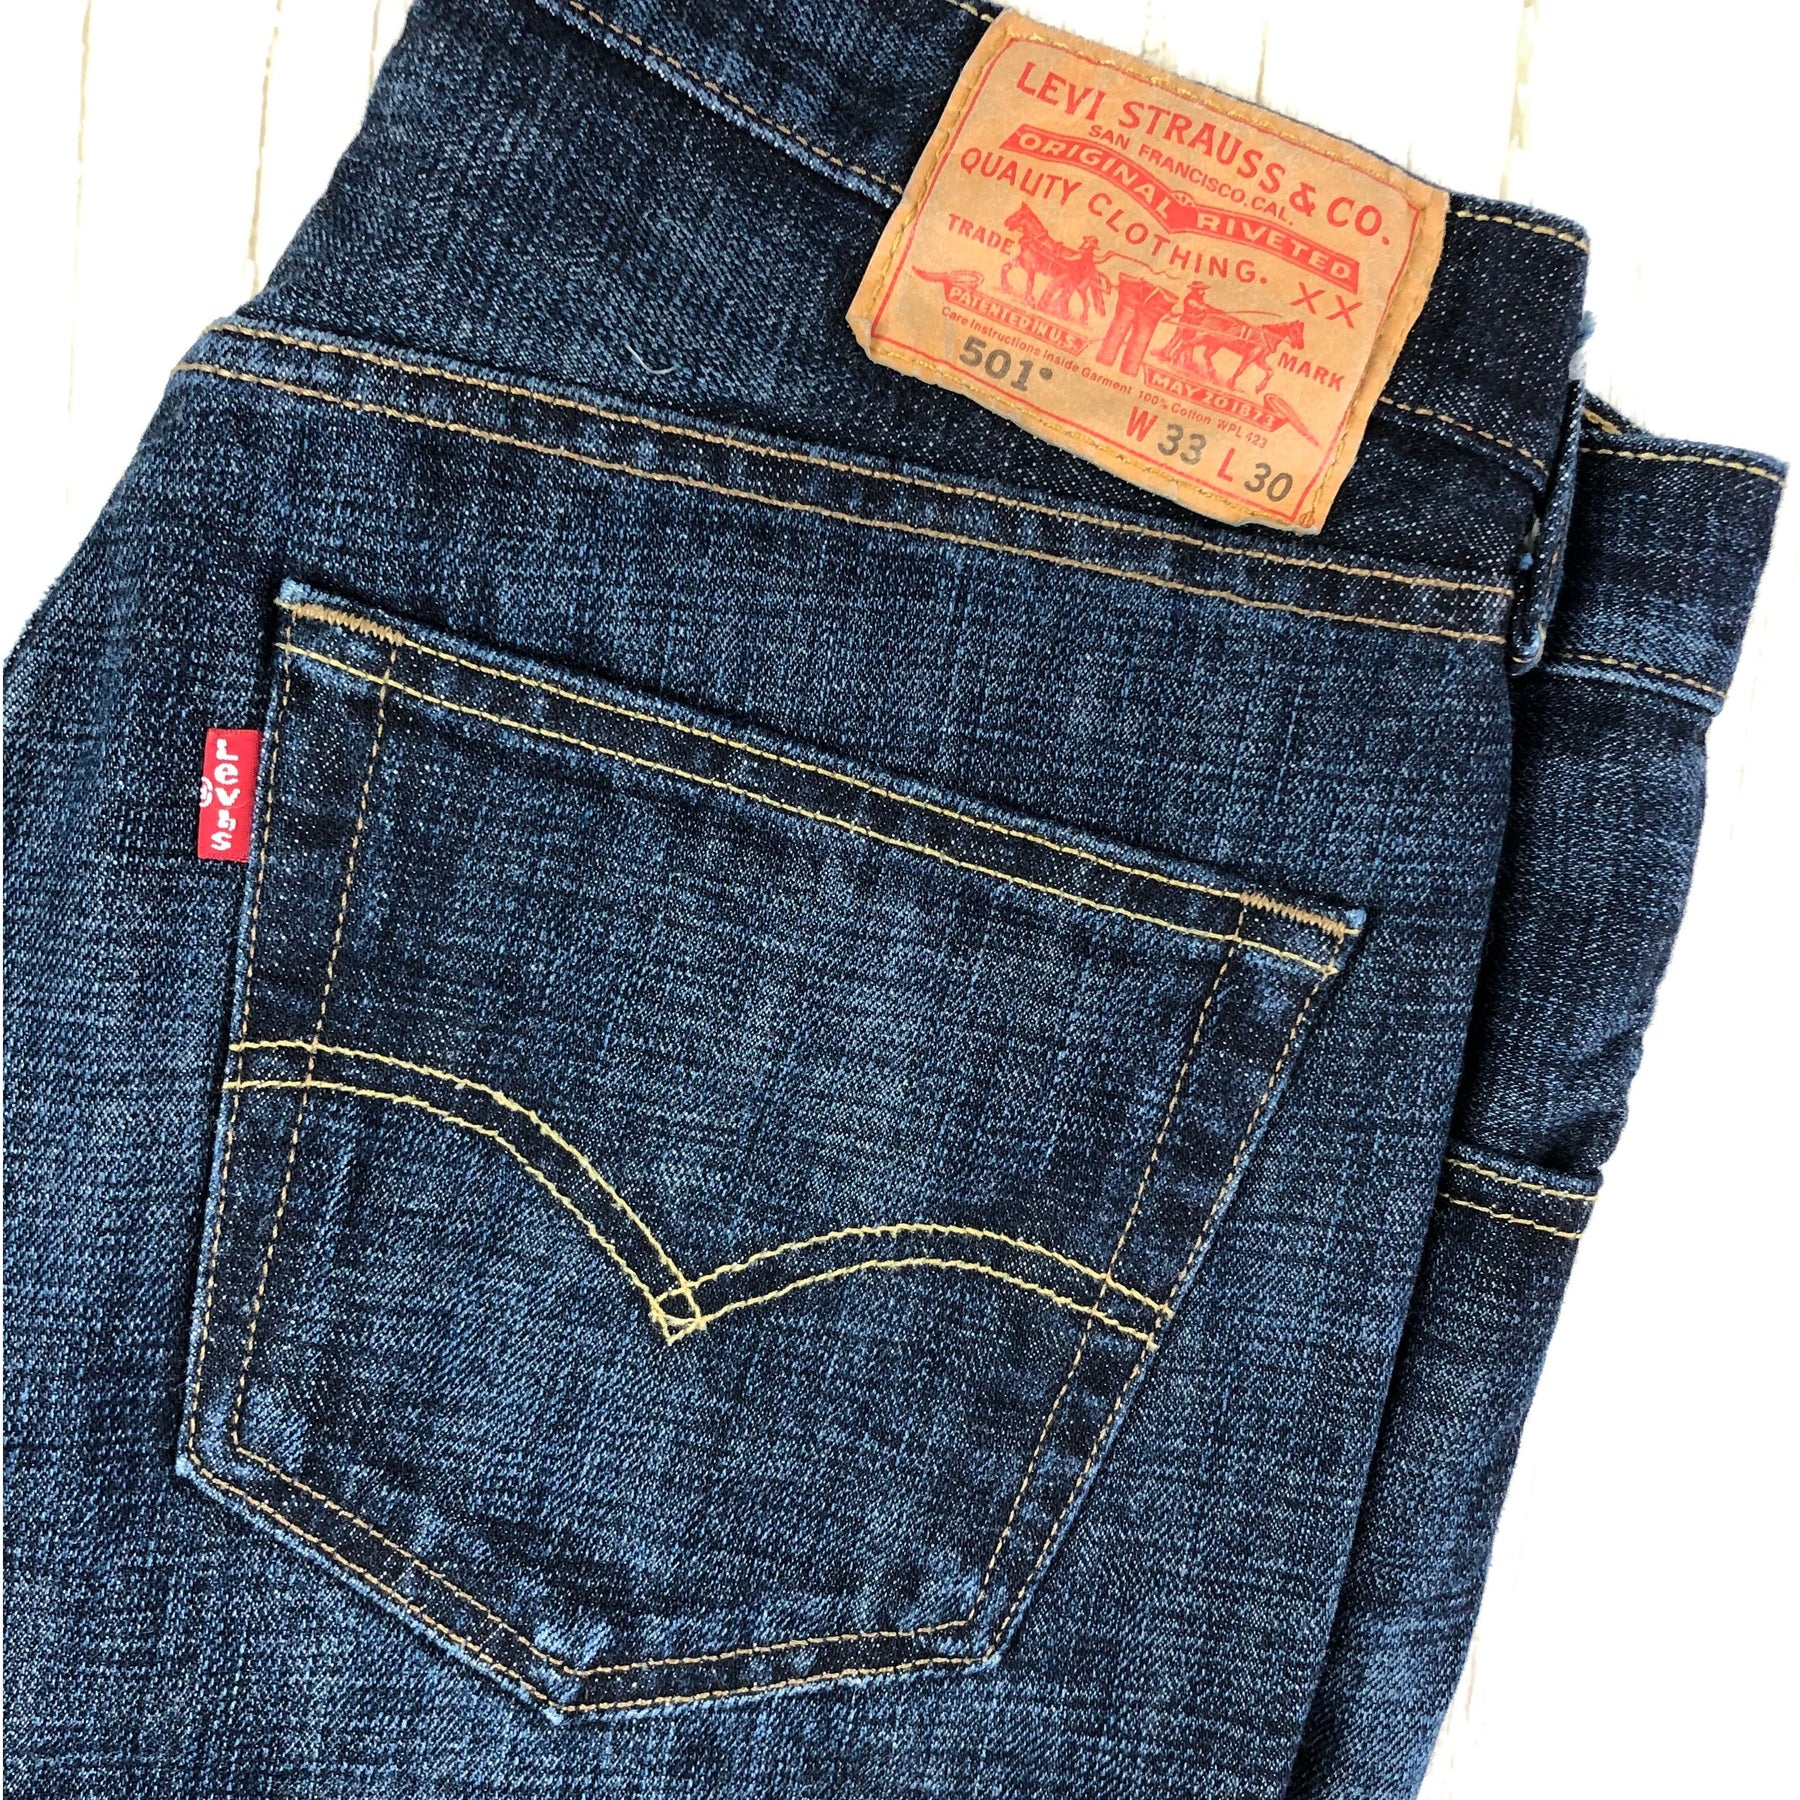 Dark Wash Classic Mens Levis 501 Button Fly Jeans -Size 33/30 – Jean Pool